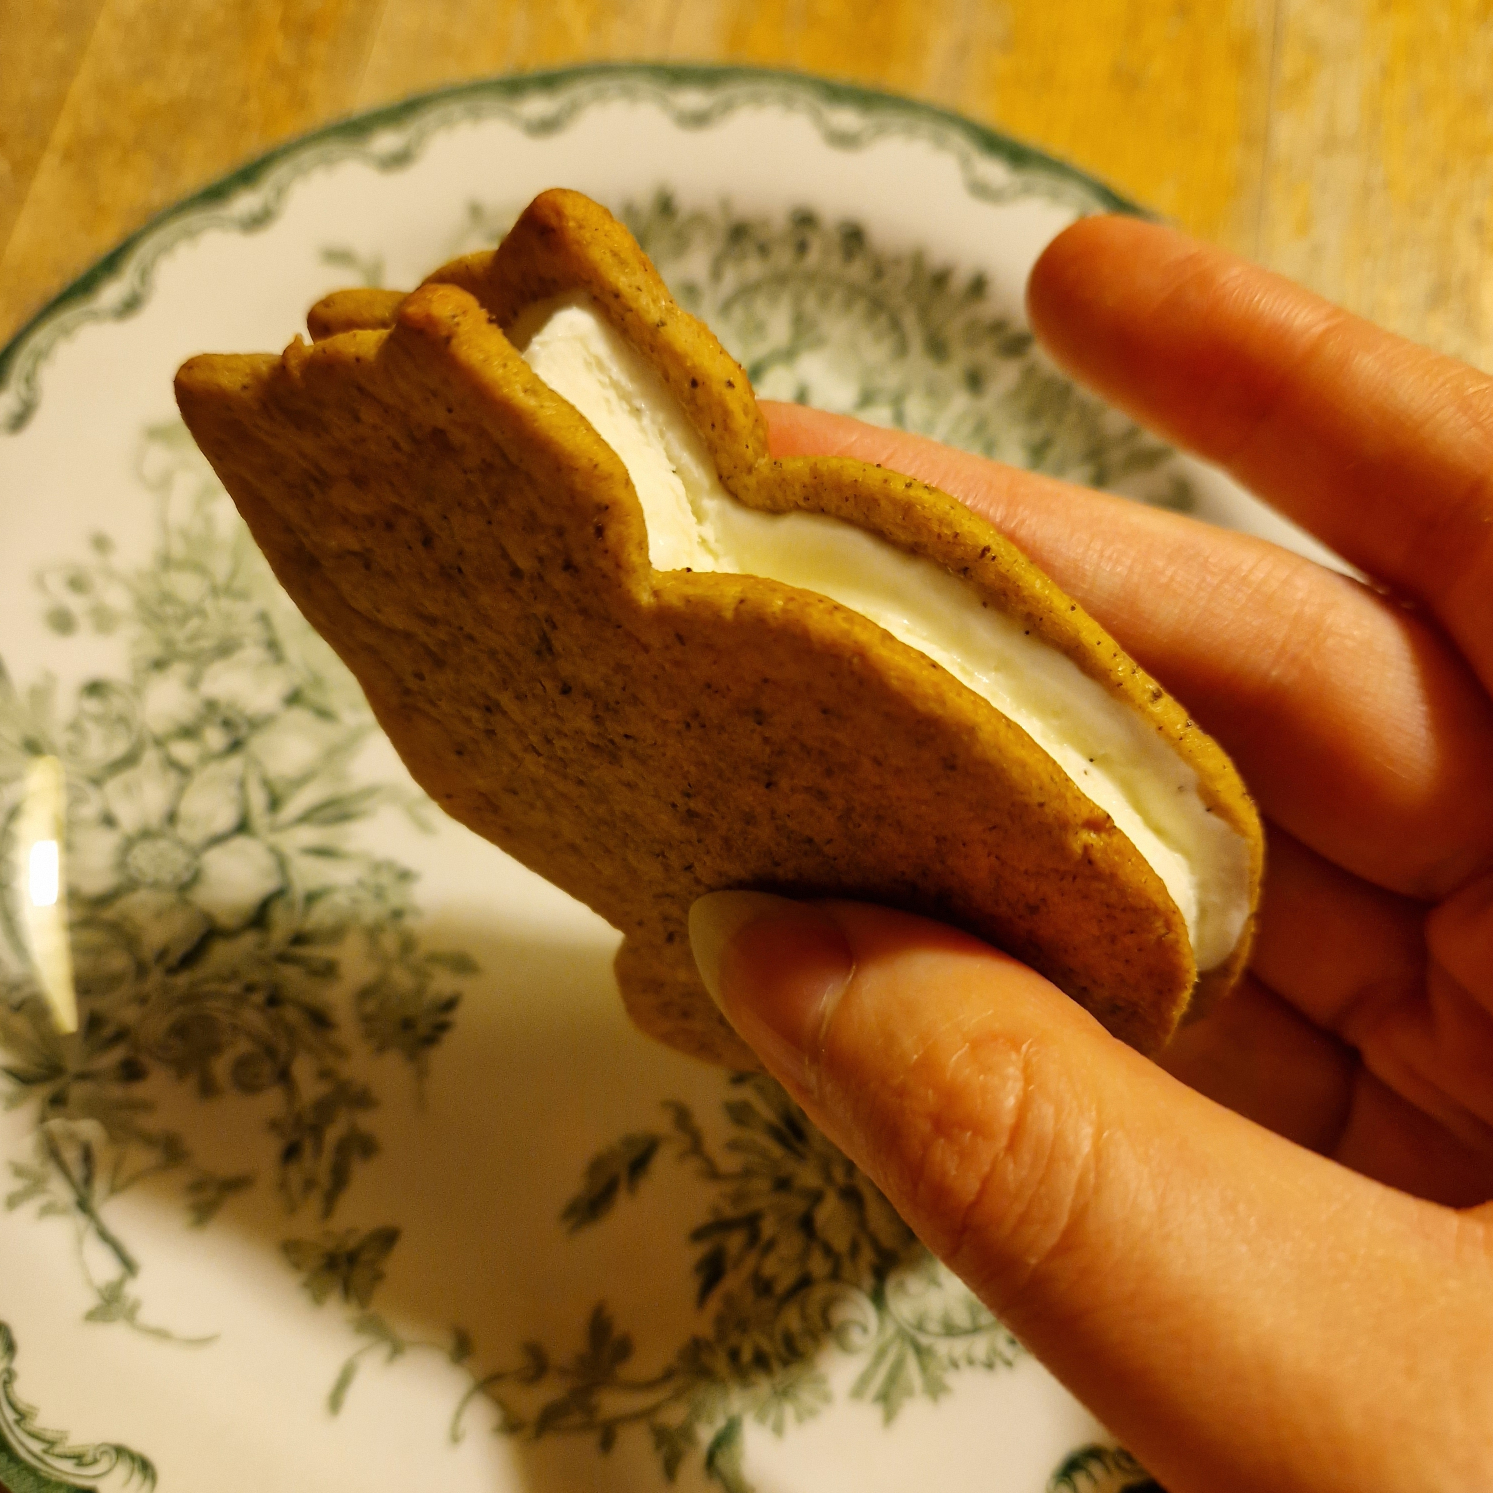 A cat shaped ice cream sandwich held in a hand, a plate in the background.